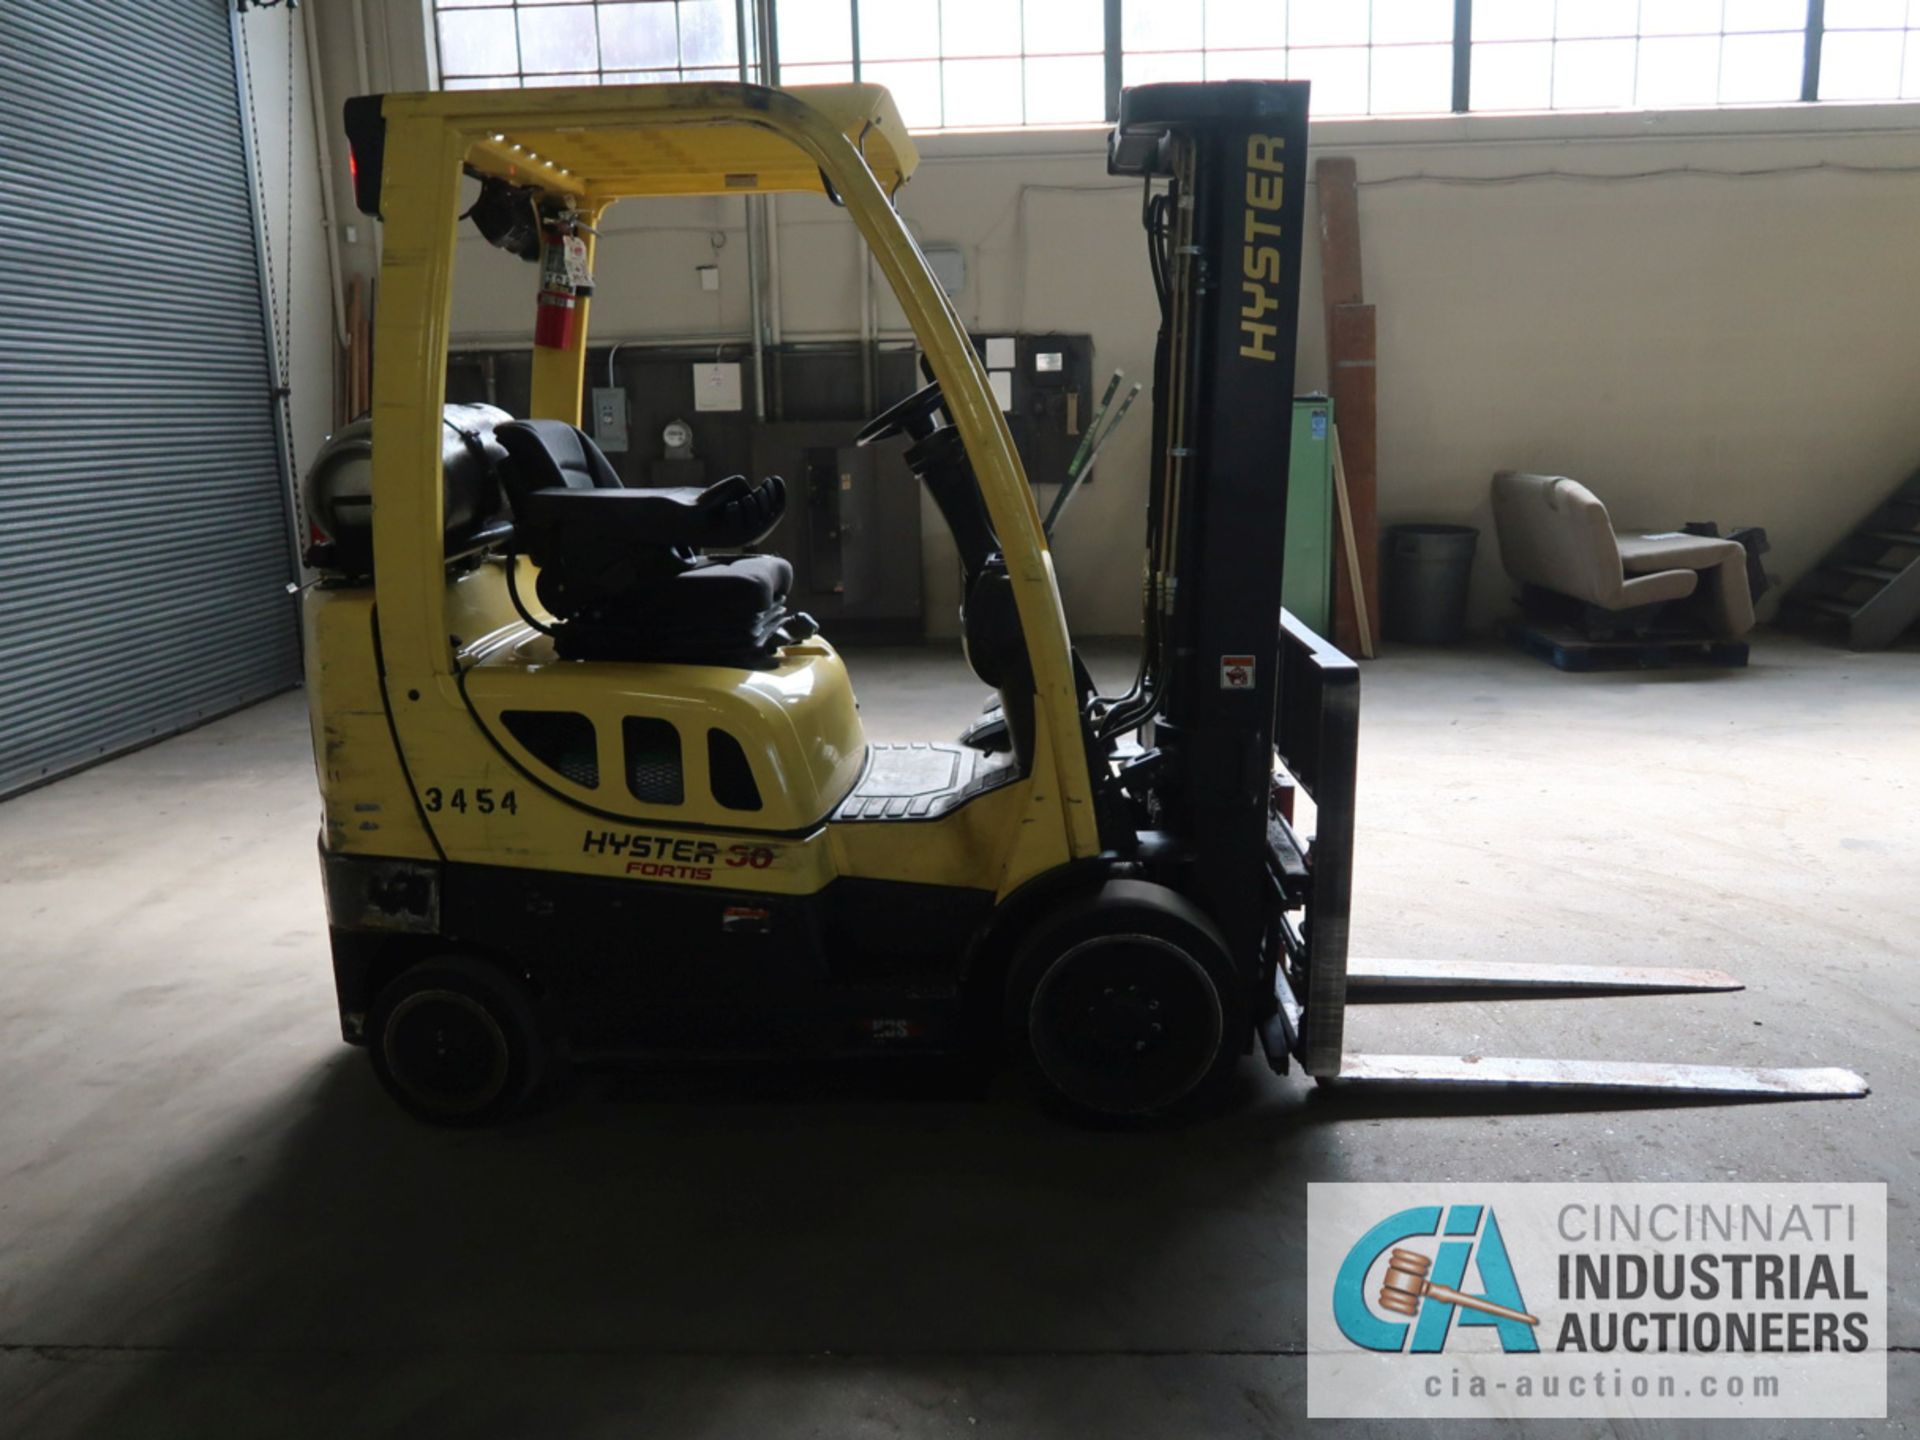 5,000 LB HYSTER MODEL S50FT LP GAS SOLID TIRE LIFT TRUCK WITH 2-STAGE MAST, 130" LIFT HEIGHT, 80" - Image 4 of 11